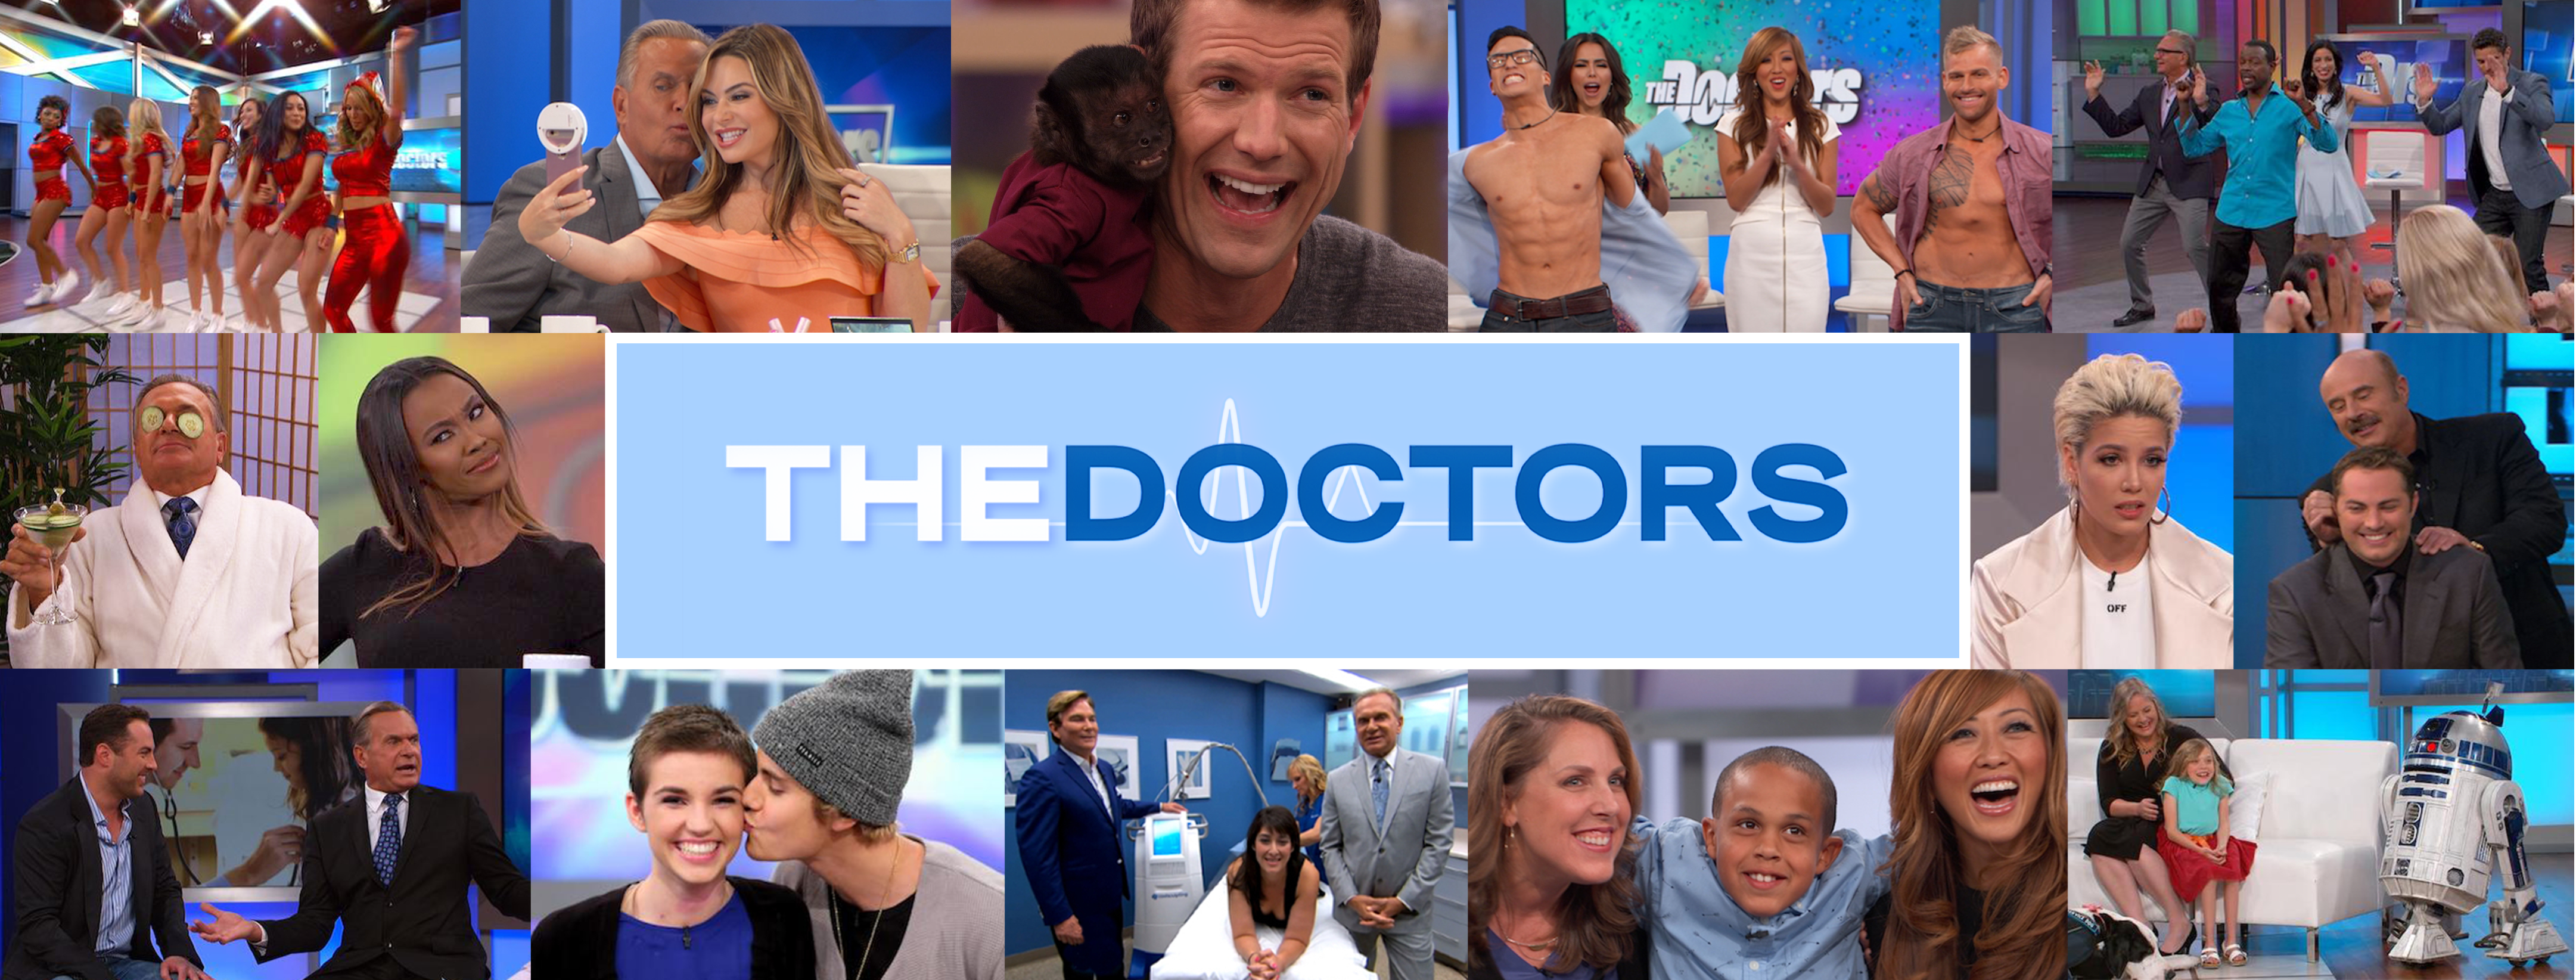 Troy on The Doctors' stage